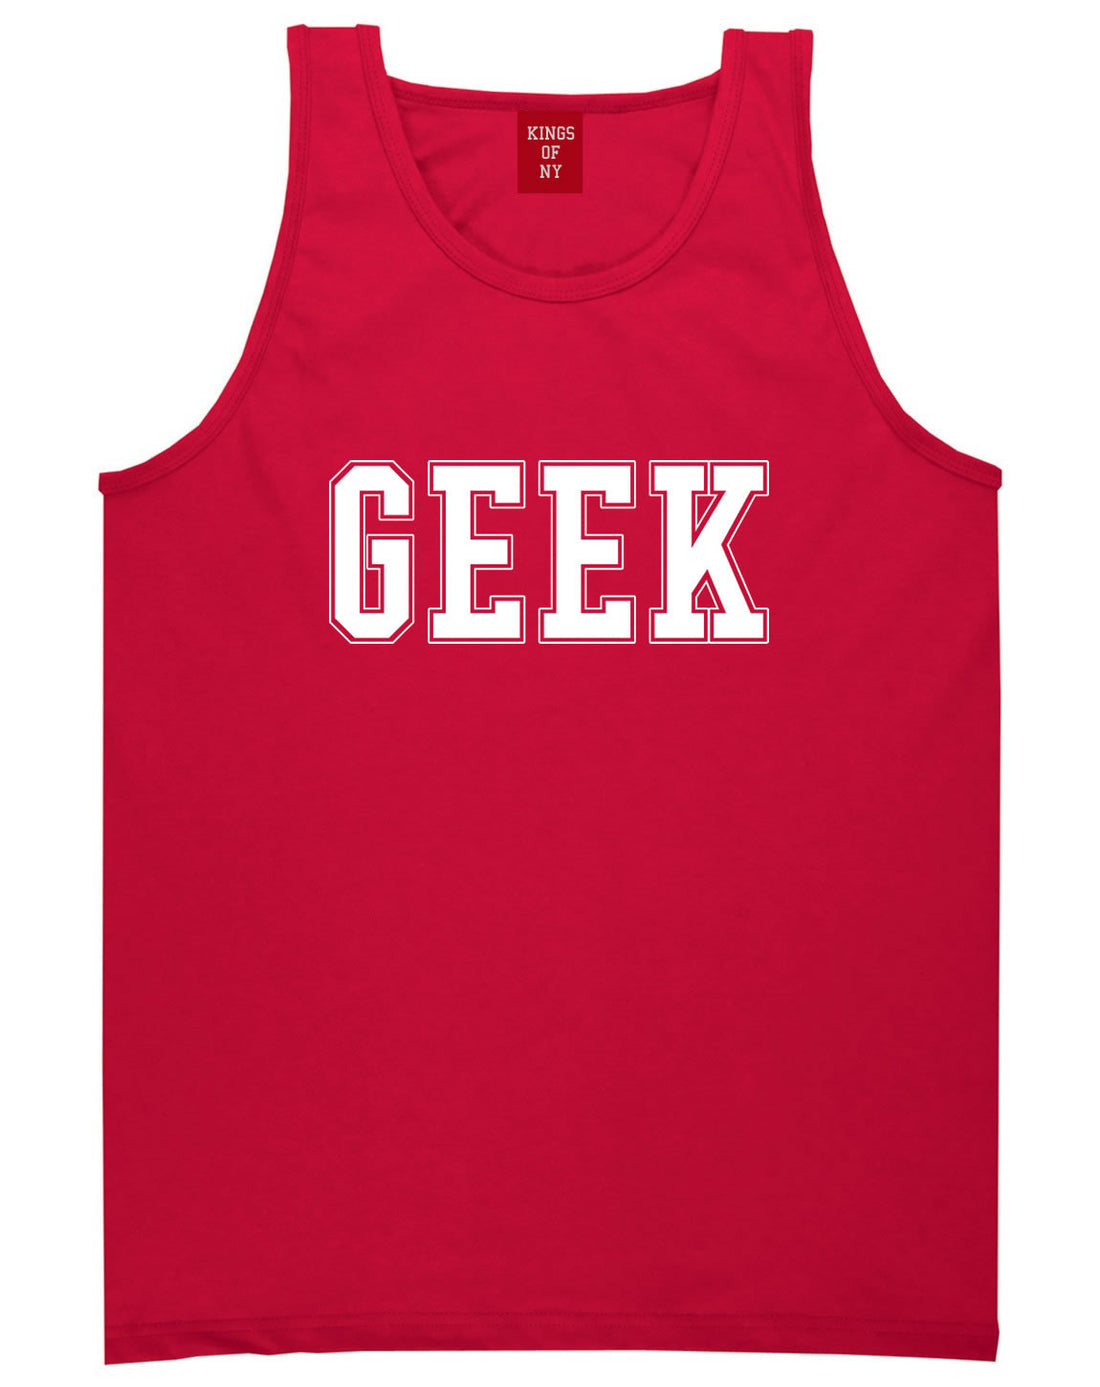 Geek College Style Tank Top in Red By Kings Of NY